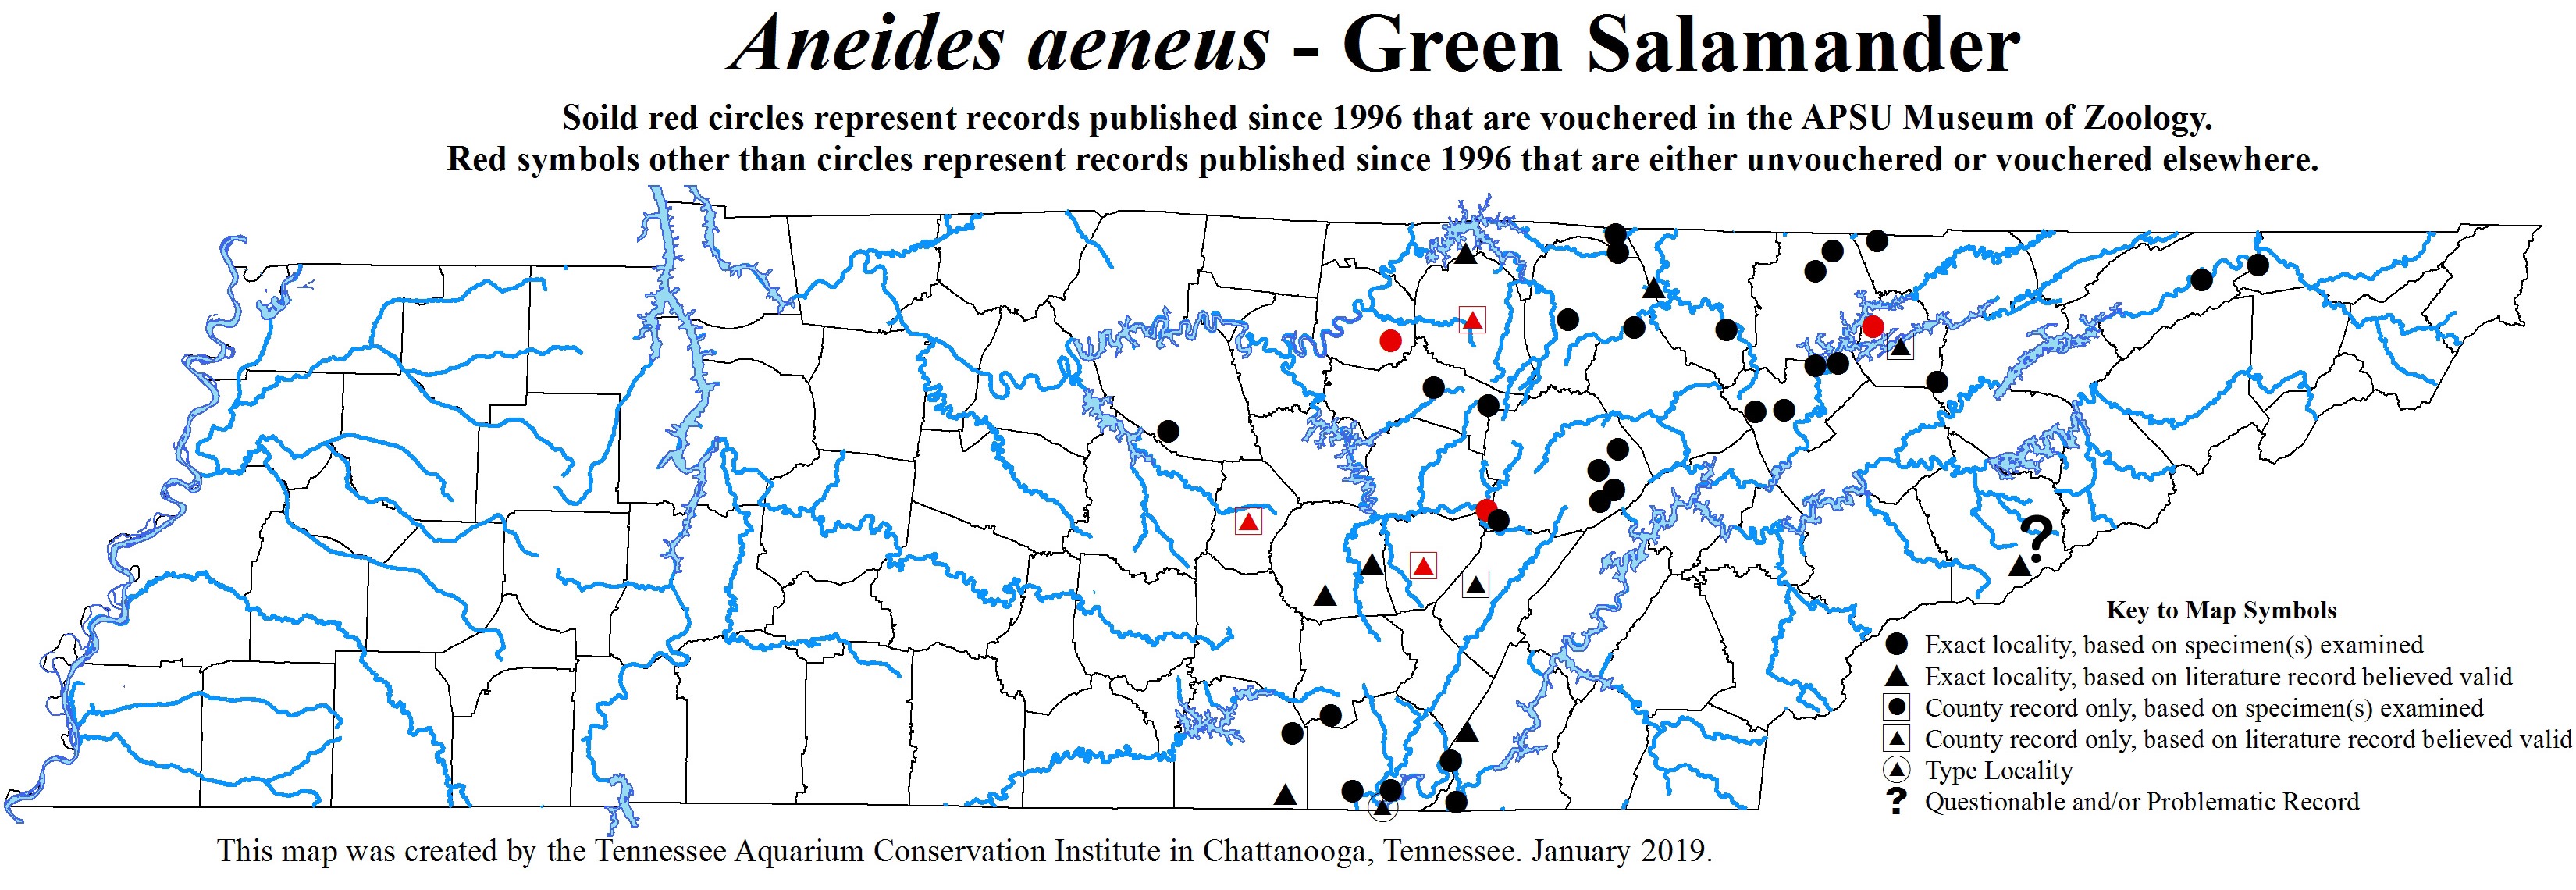 New Distribution Map - Aneides aeneus (Cope and Packard) - Green Salamander